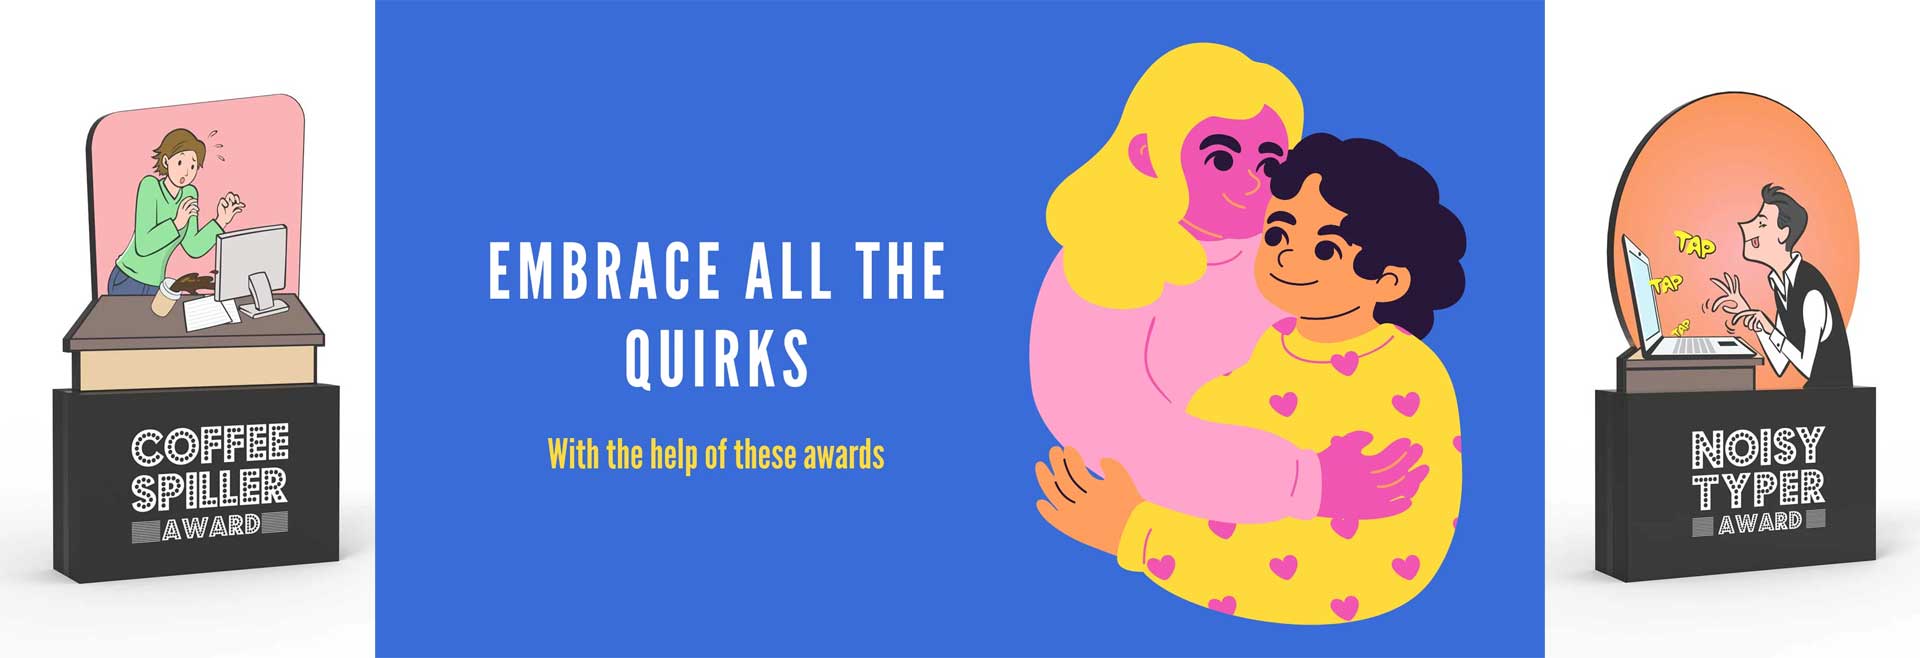 Awards that Celebrate Quirks